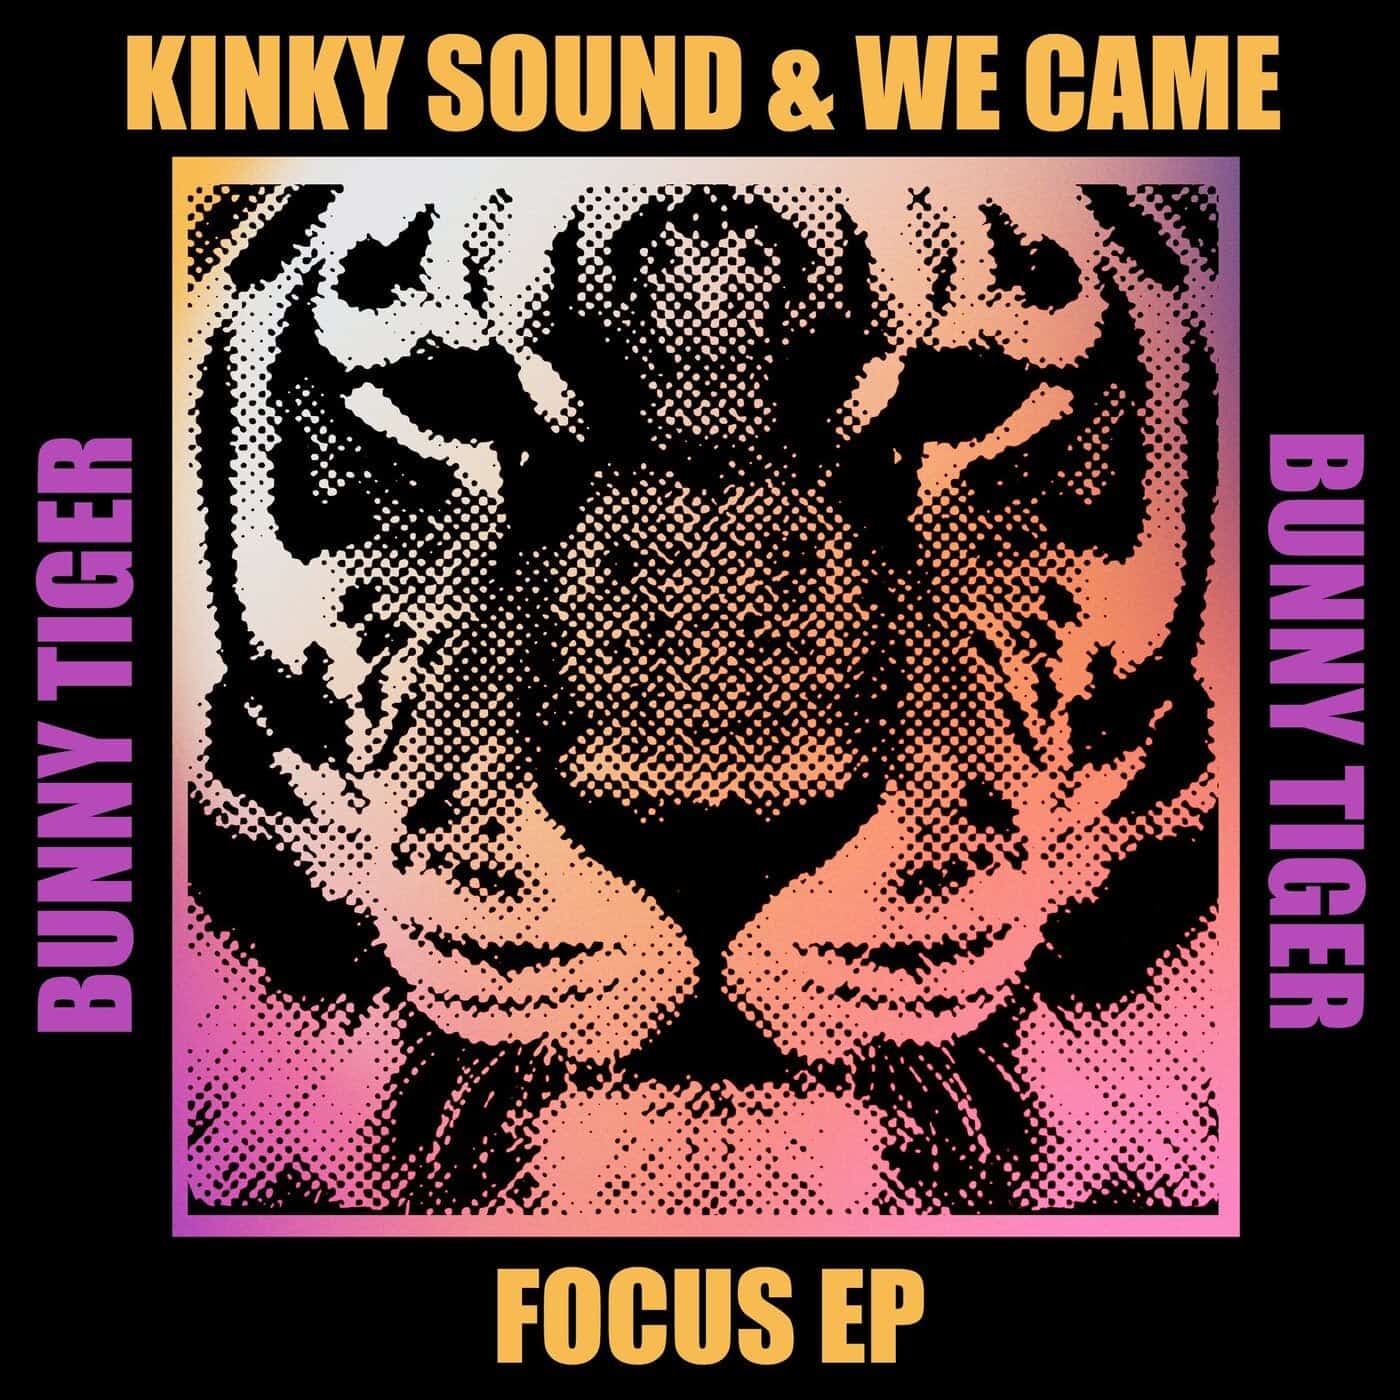 Download Kinky Sound, We Came - Focus EP on Electrobuzz